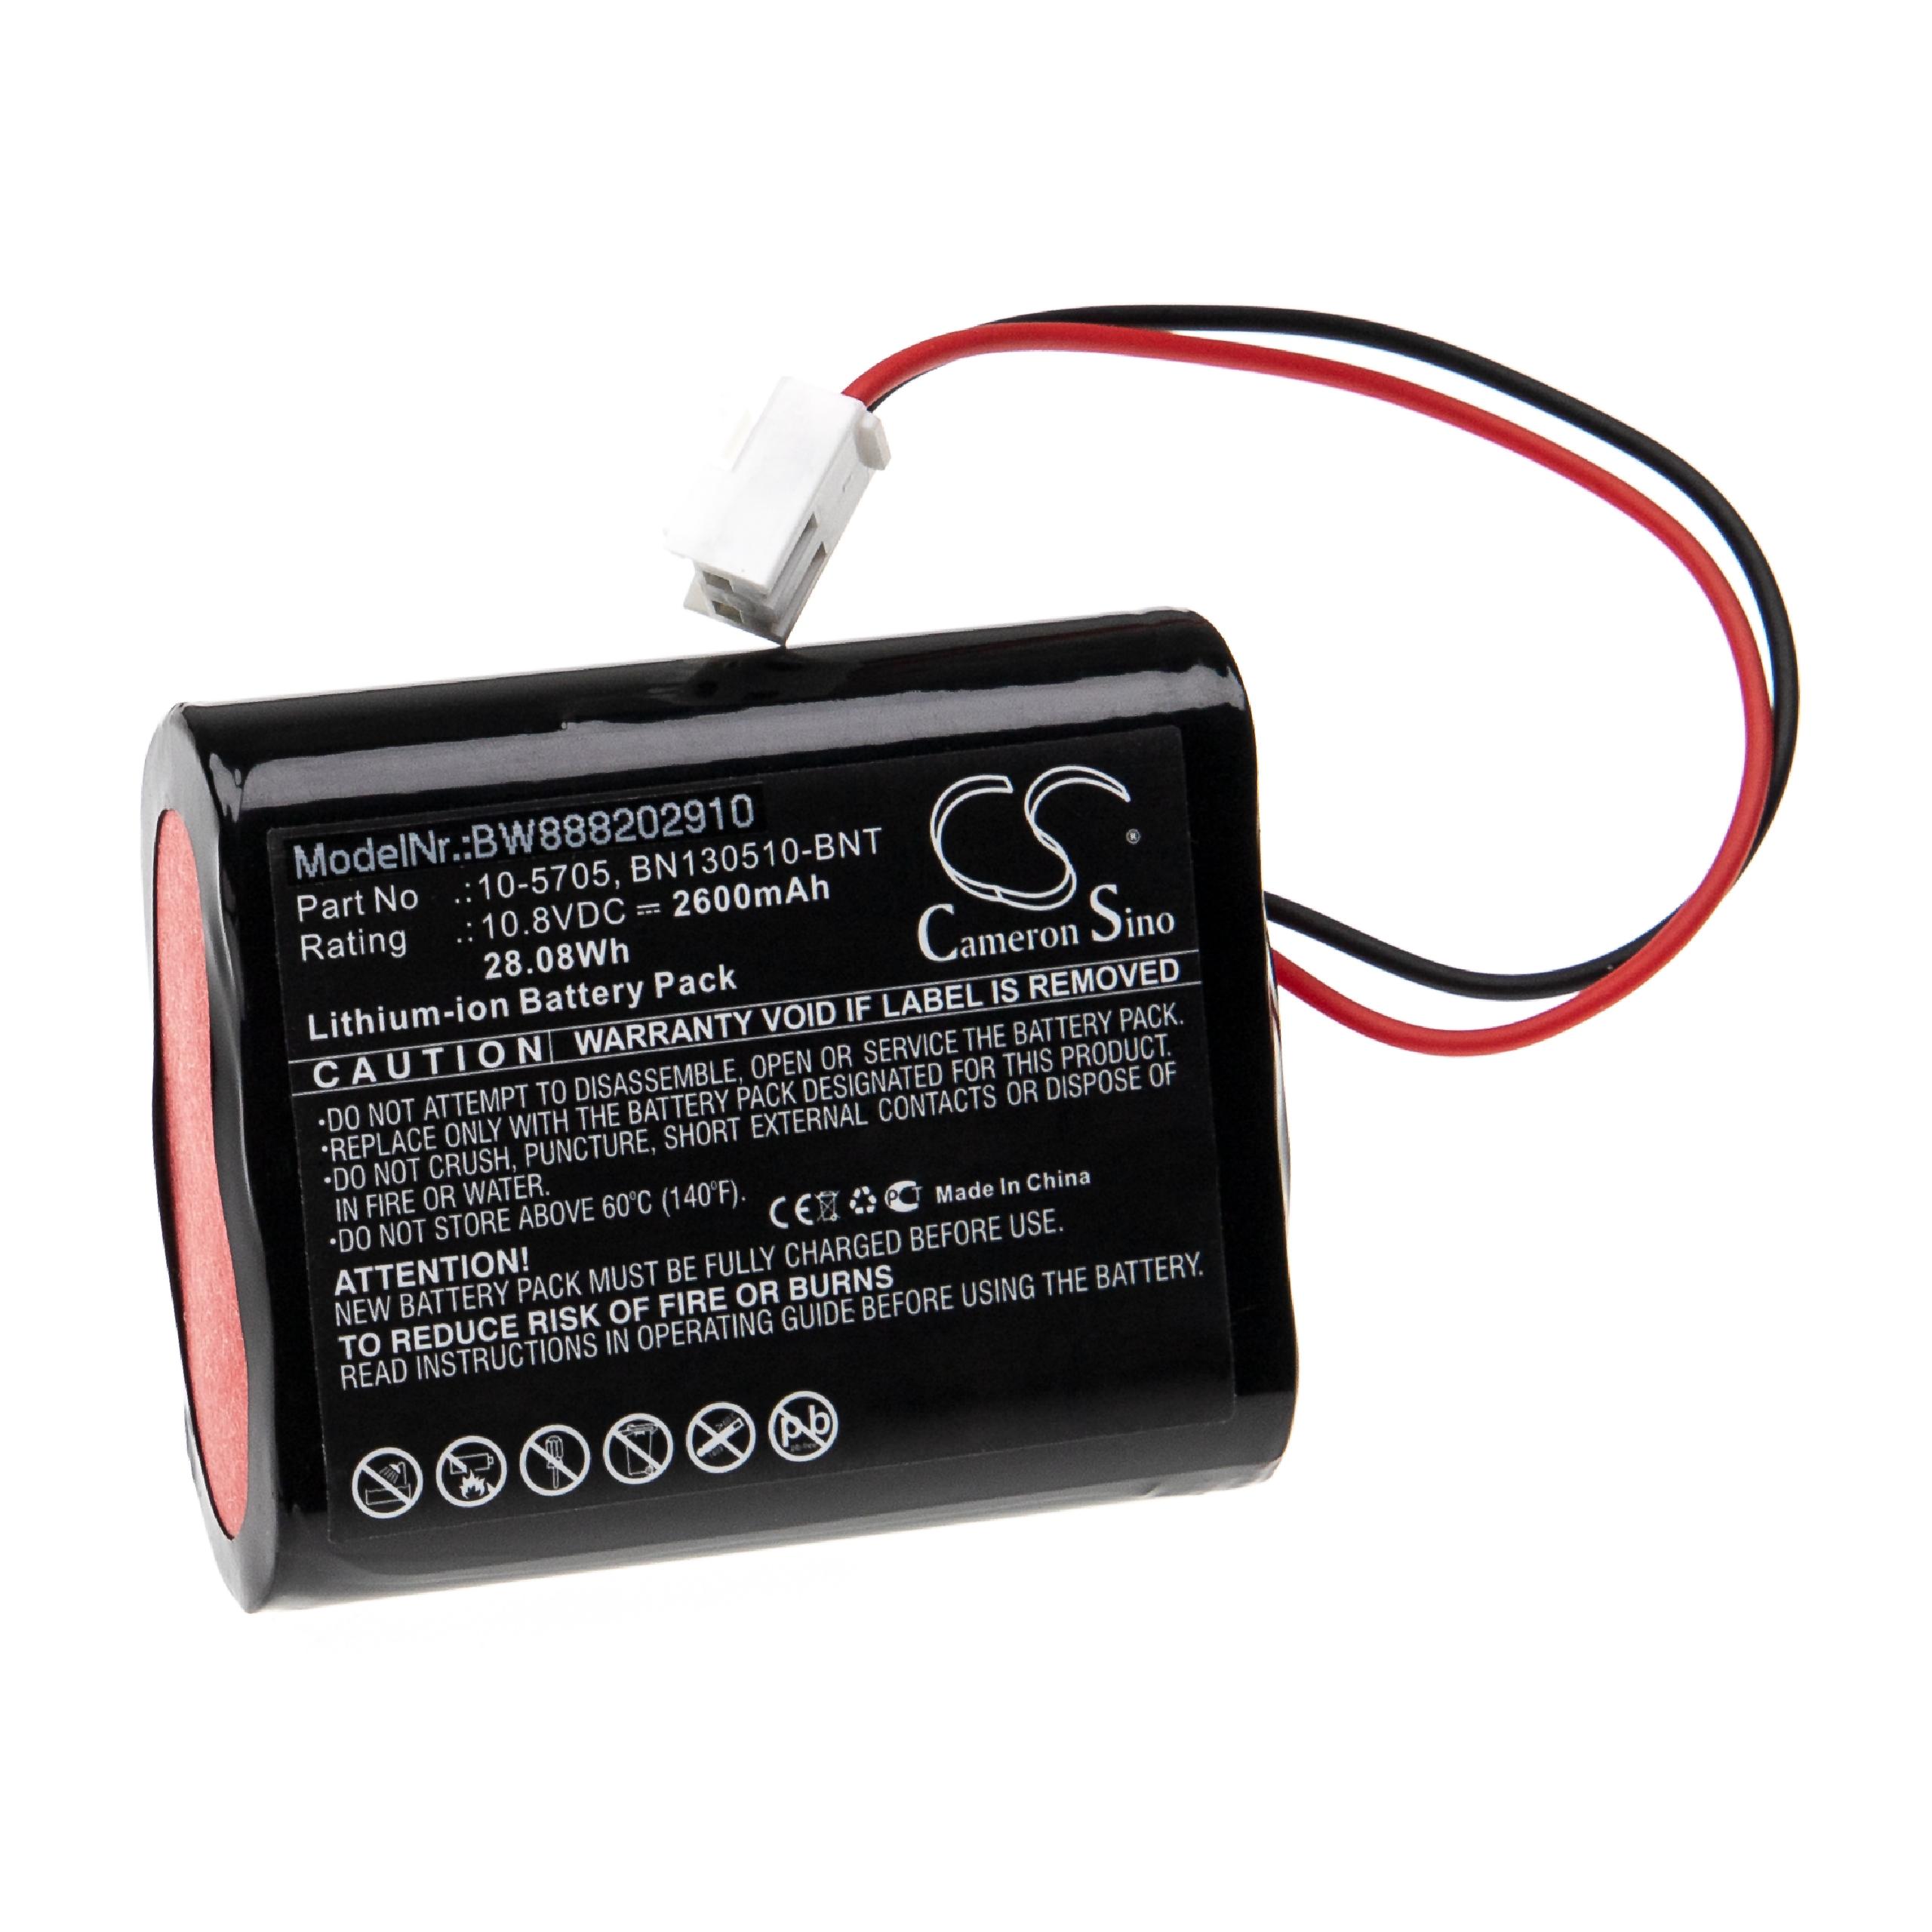 Medical Equipment Battery Replacement for Bionet 10-5705, BN130510-BNT - 2600mAh 10.8V Li-Ion